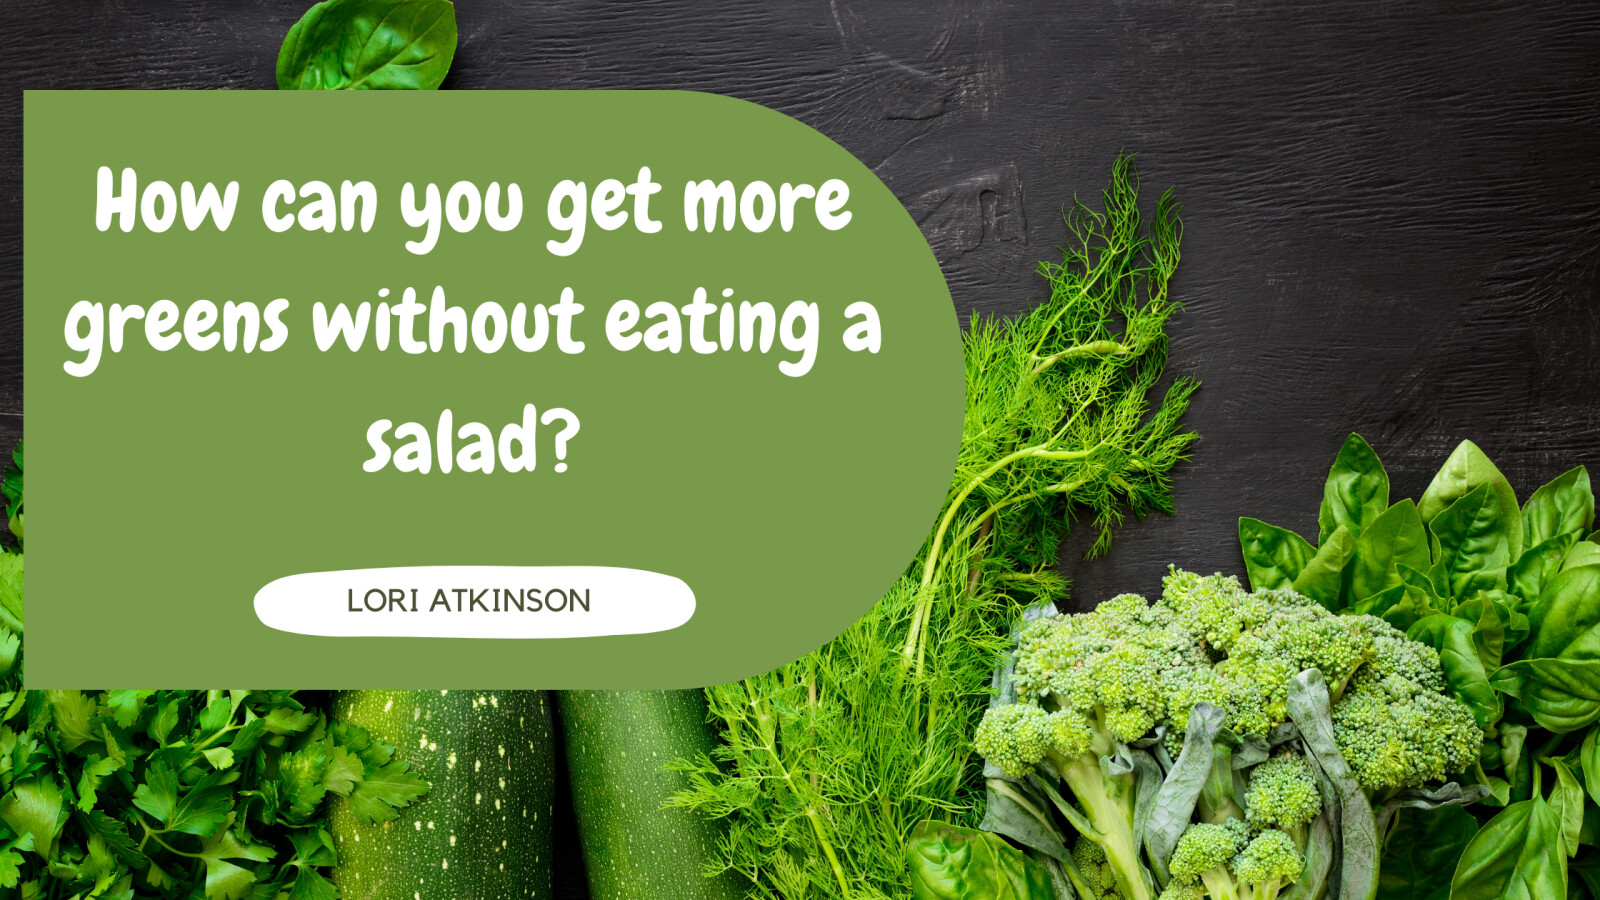 How can you get more greens without eating a salad?